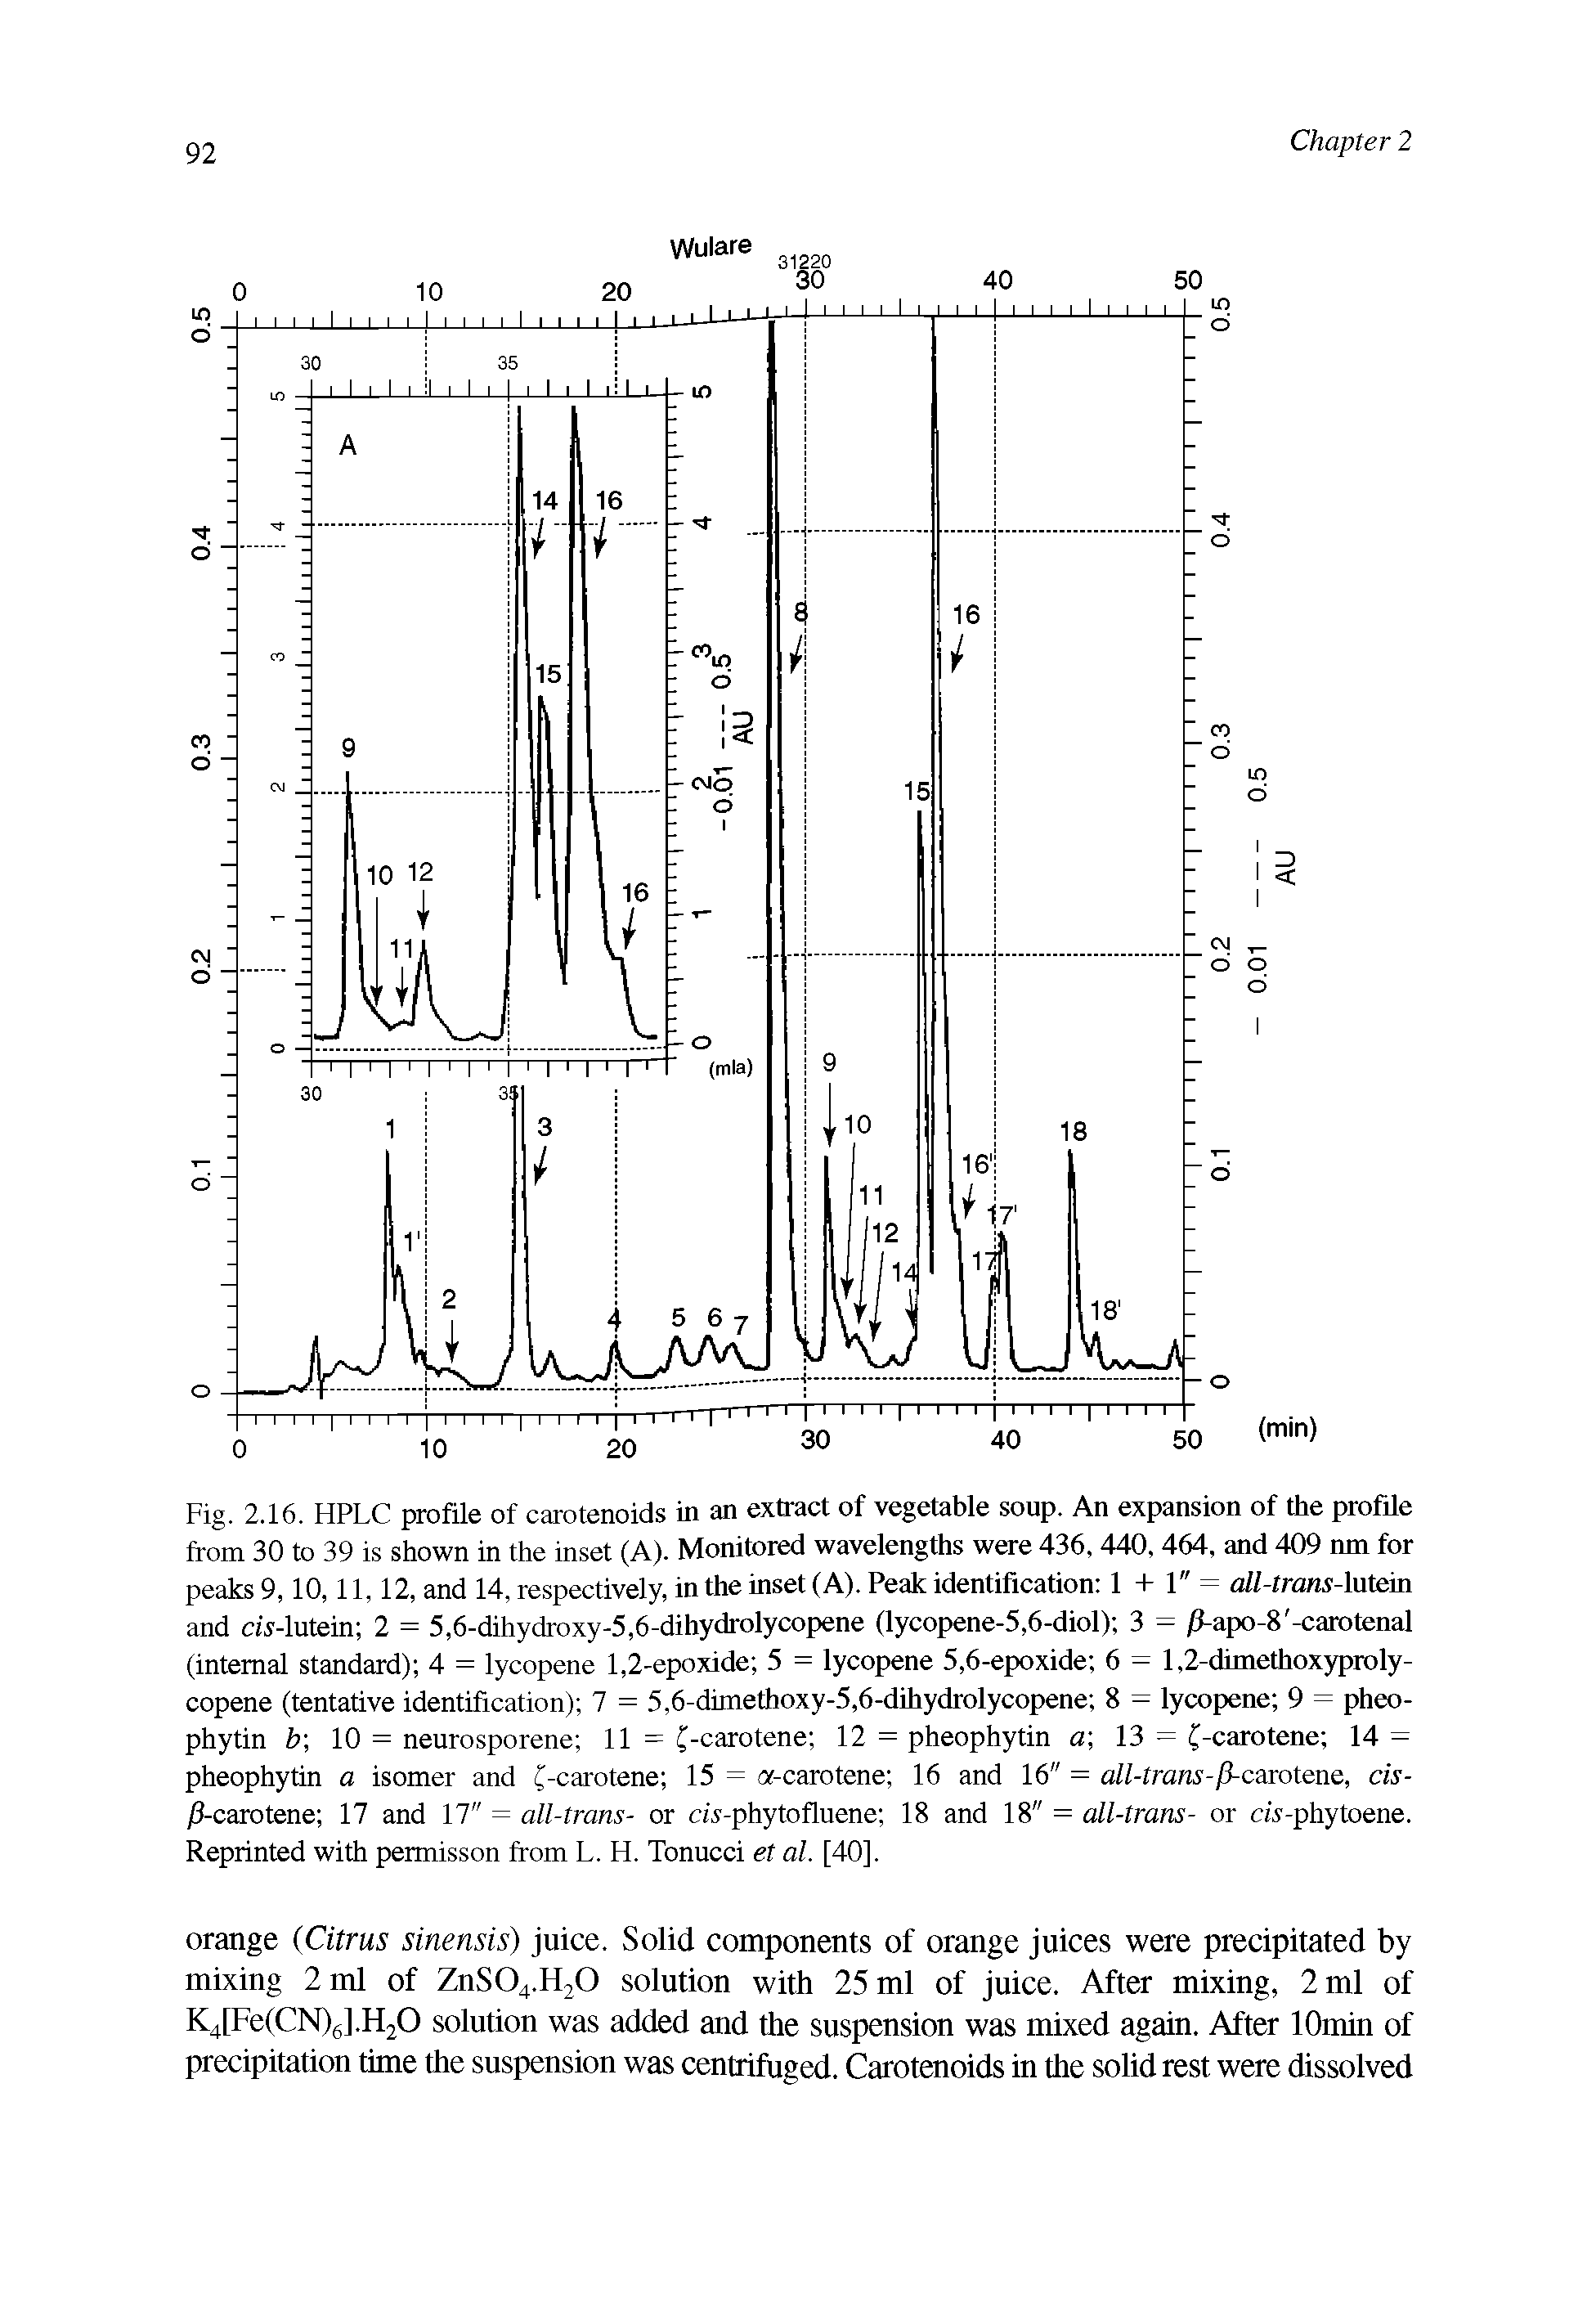 Fig. 2.16. HPLC profile of carotenoids in an extract of vegetable soup. An expansion of the profile from 30 to 39 is shown in the inset (A). Monitored wavelengths were 436, 440, 464, and 409 nm for peaks 9,10,11,12, and 14, respectively, in the inset (A). Peak identification 1 + 1" = all-trans-lutein and cw-lutein 2 = 5,6-dihydroxy-5,6-dihydrolycopene (lycopene-5,6-diol) 3 = j3-apo-8 -carotenal (internal standard) 4 = lycopene 1,2-epoxide 5 = lycopene 5,6-epoxide 6 = 1,2-dimethoxyproly-copene (tentative identification) 7 = 5,6-dimethoxy-5,6-dihydrolycopene 8 = lycopene 9 = pheo-phytin b 10 = neurosporene 11 = (-carotene 12 = pheophytin a 13 = (-carotene 14 = pheophytin a isomer and (-carotene 15 = a-carotene 16 and 16" = all-trans-/fcarotene, cis-/J-carotene 17 and 17" = all-trans- or cA-phytofluene 18 and 18" = all-trans- or cw-phytoene. Reprinted with permisson from L. H. Tonucci et al. [40].